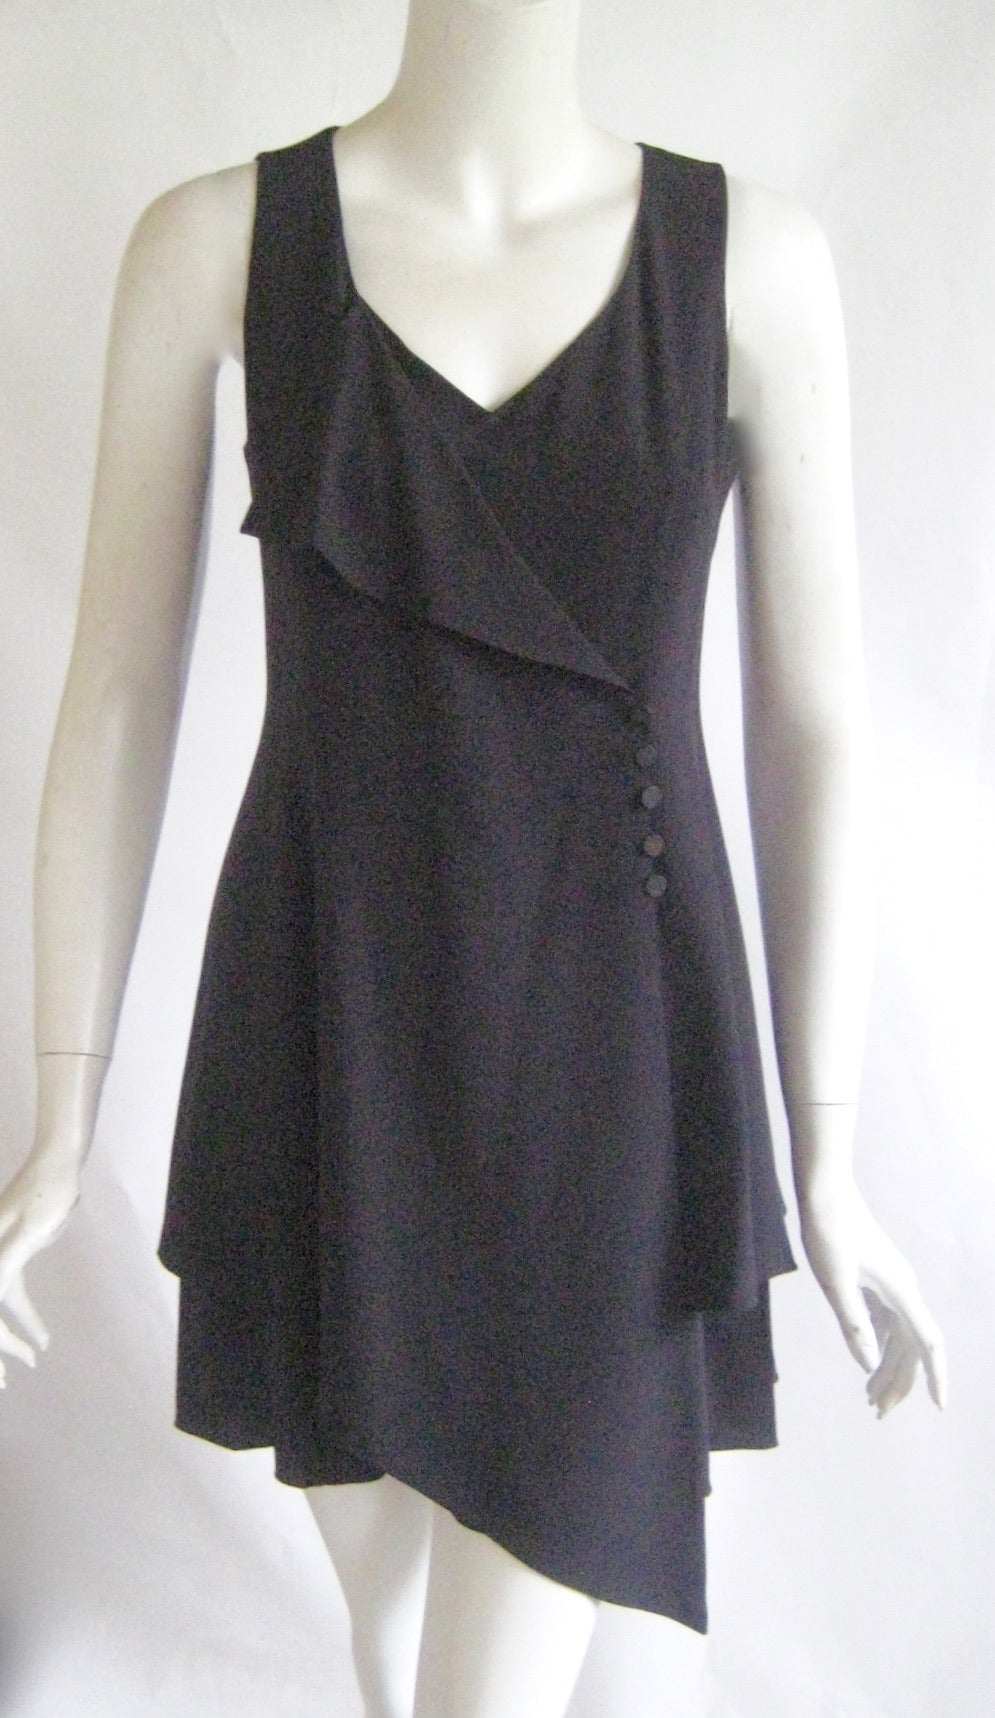 Love;y little black dress
100% silk 
Zipper up the back 
Buttons up the front 
Excellent condition 
Size 38